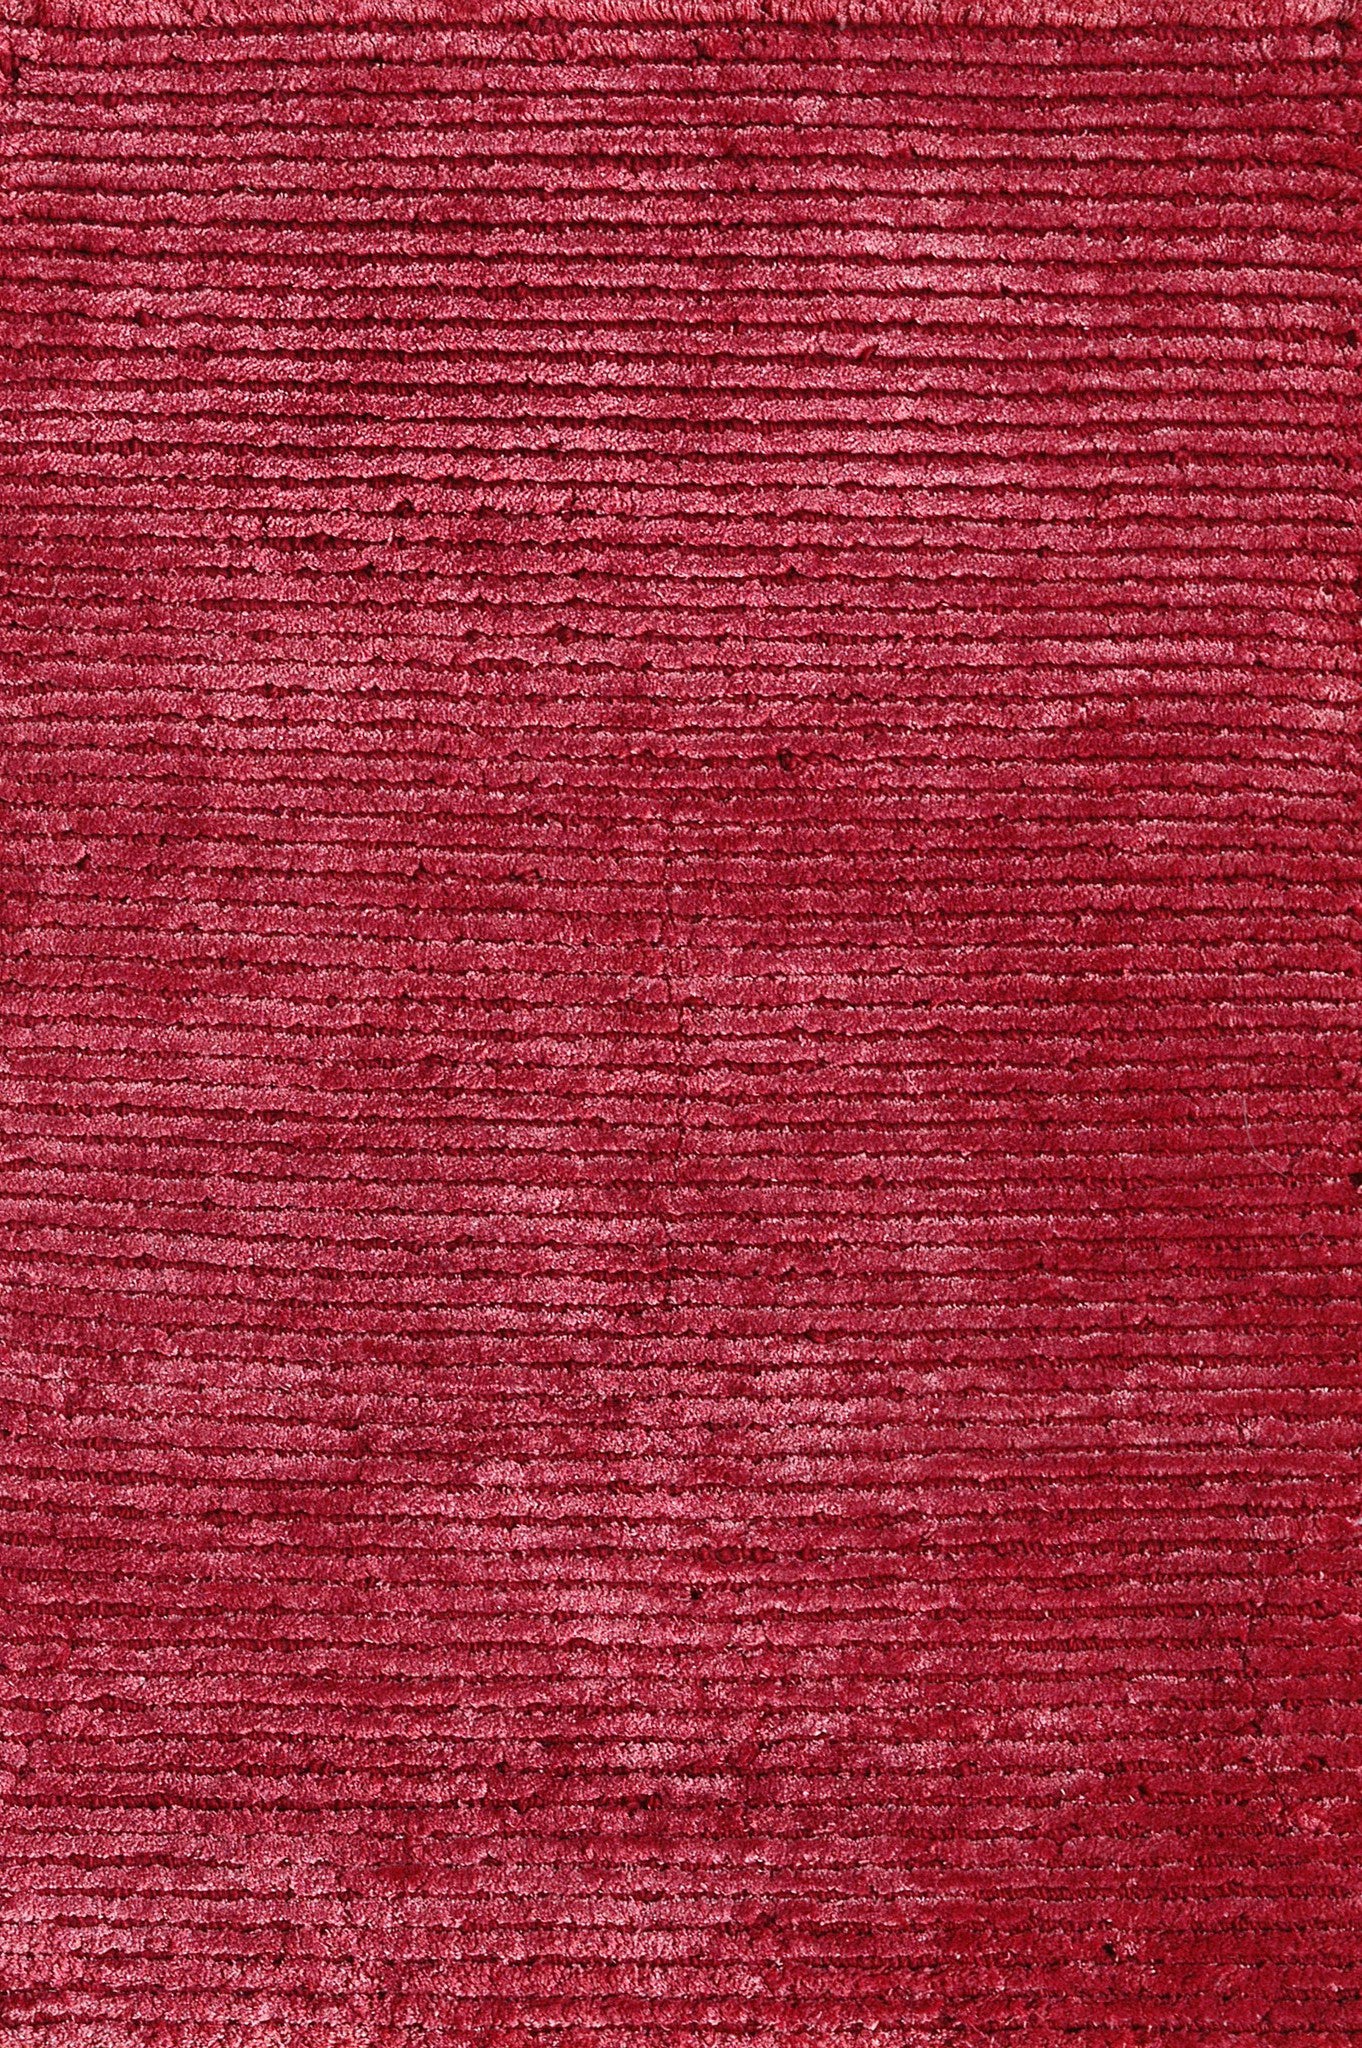 Loloi Electra ET-01 Red Area Rug main image